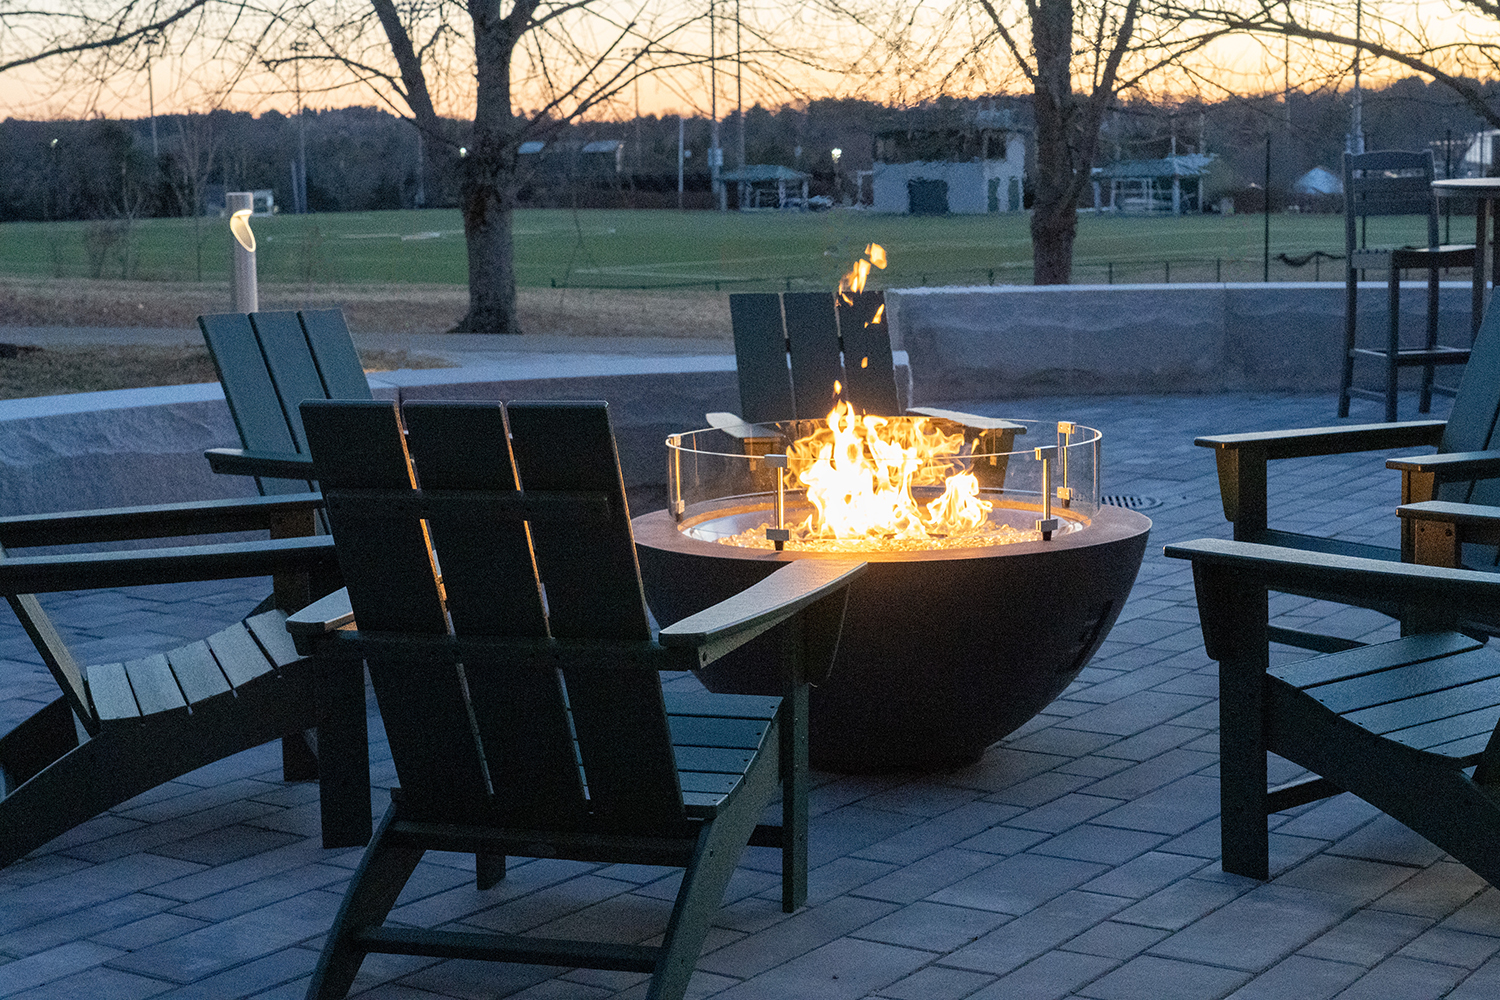 A fire burns in a round fire pit with chairs surrounding it and Husson University's campus in the background.